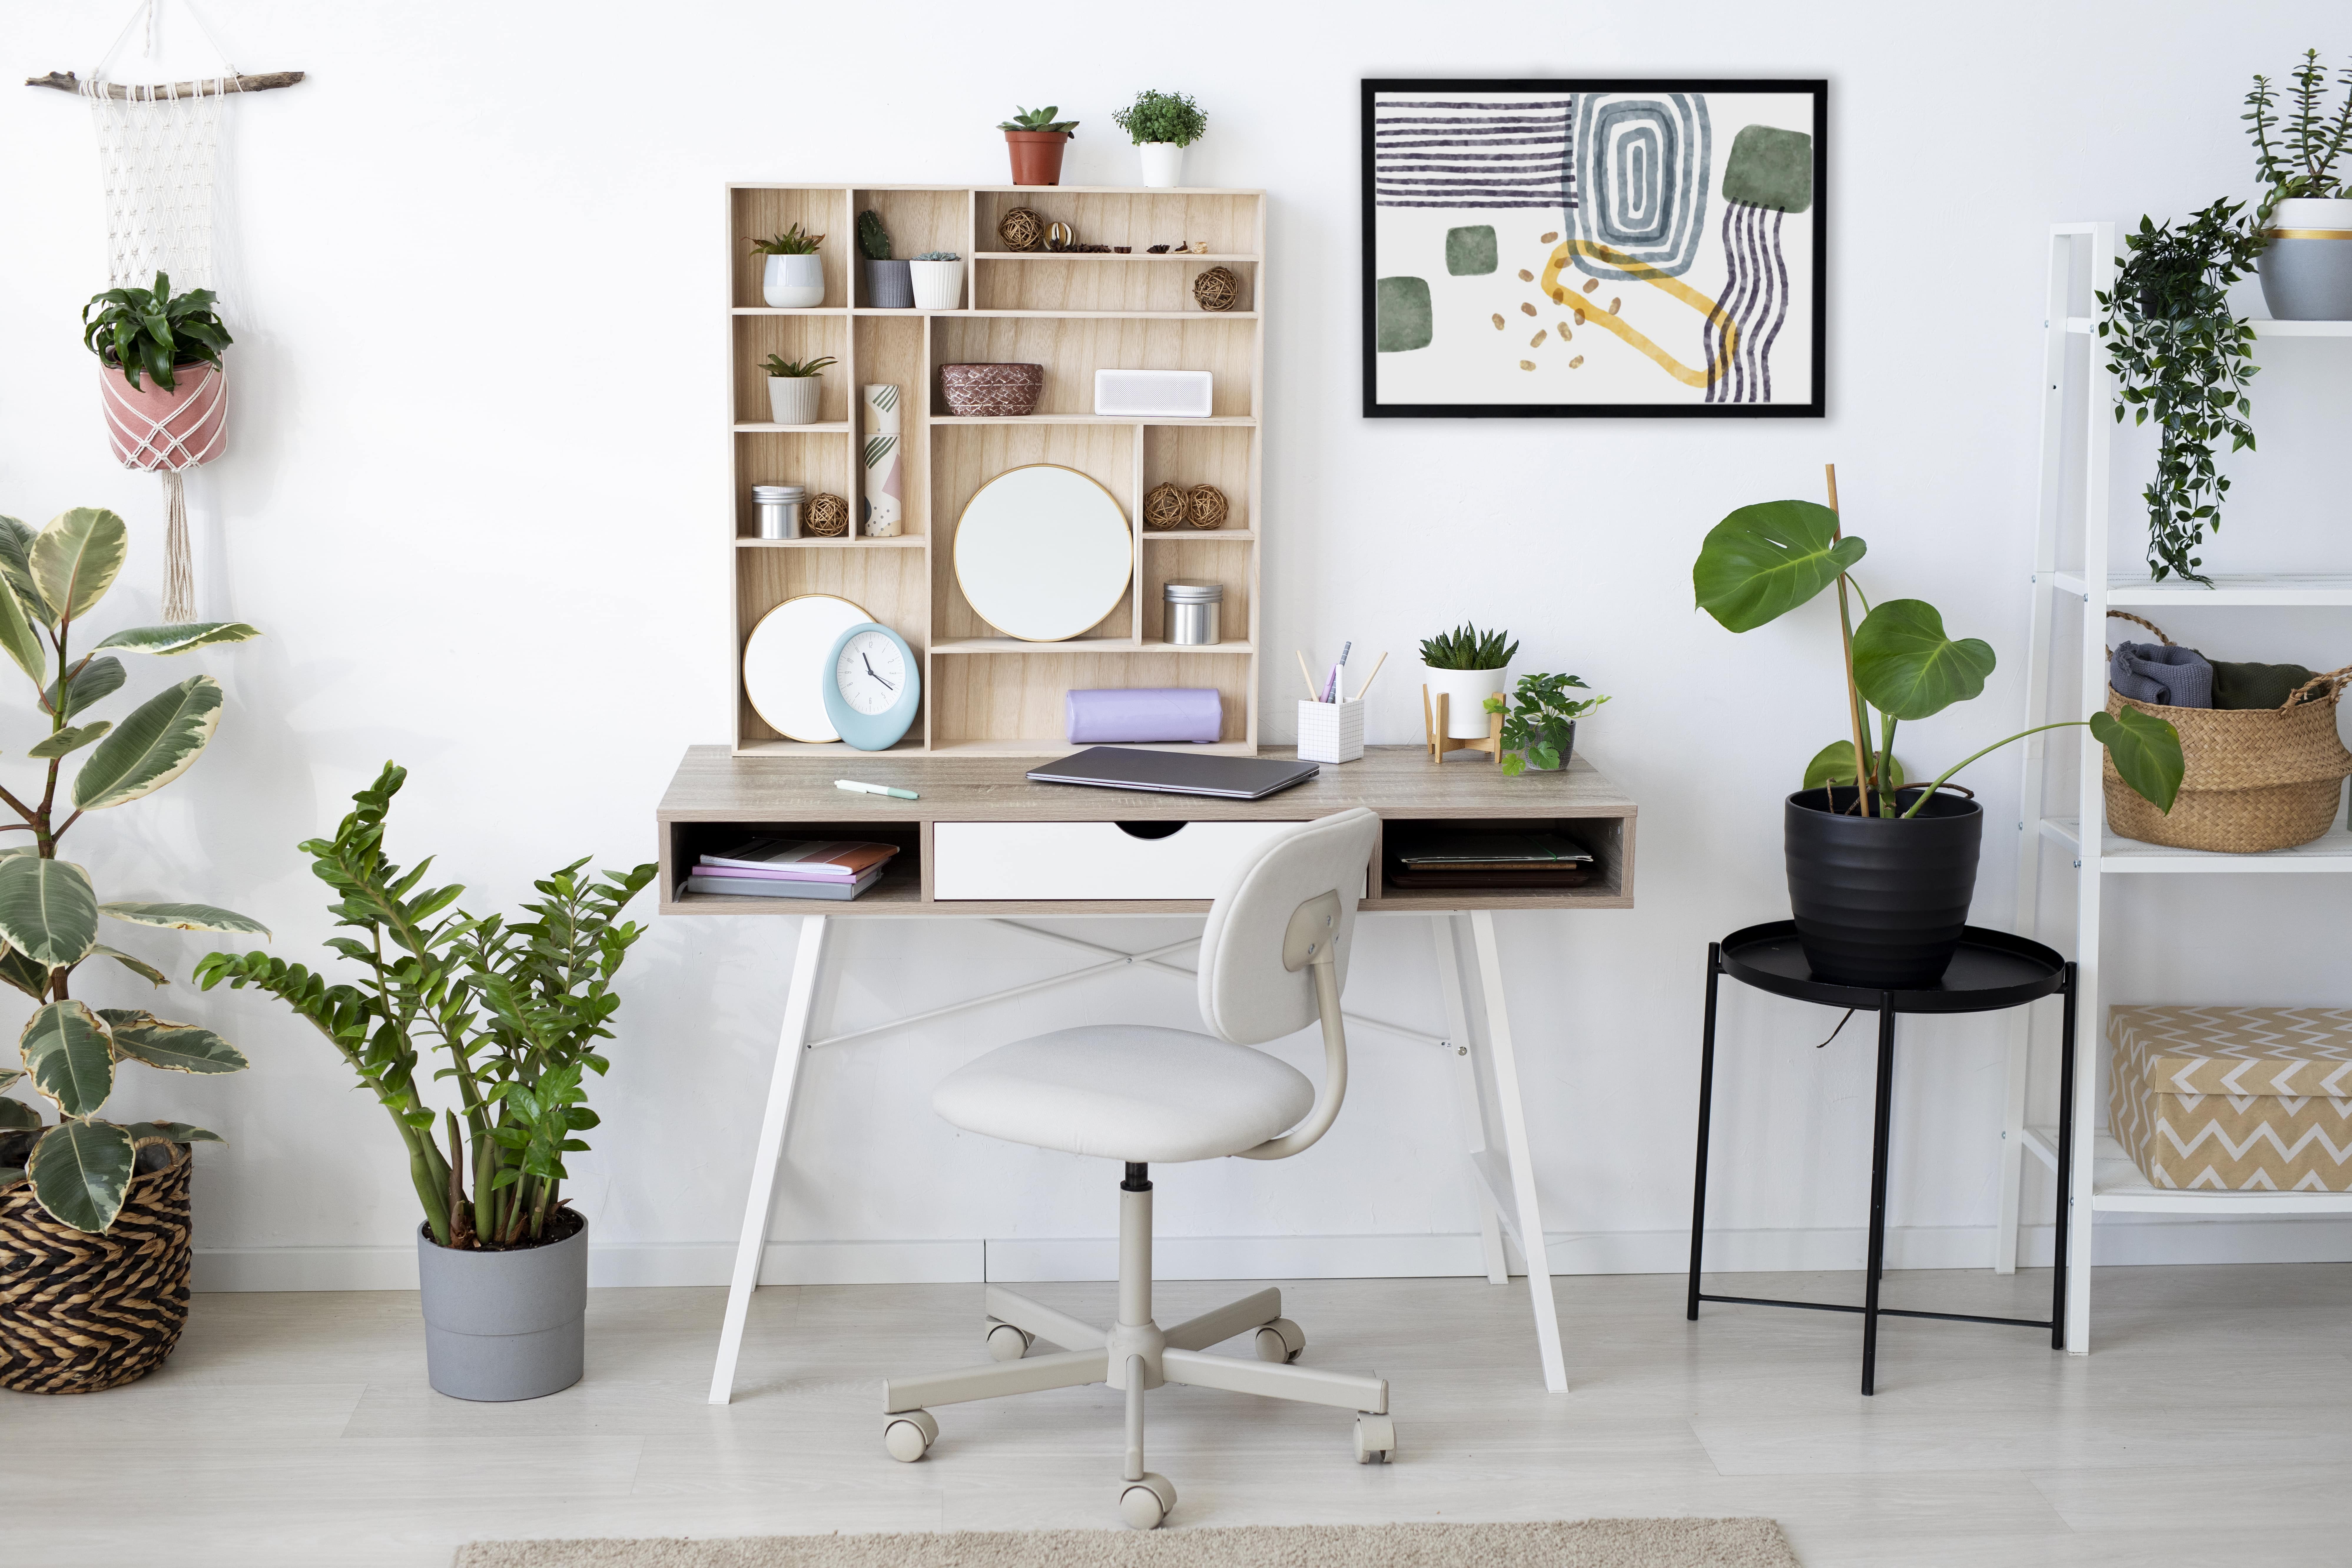 The Ideal Home Office Setup for Maximum Productivity [2023]